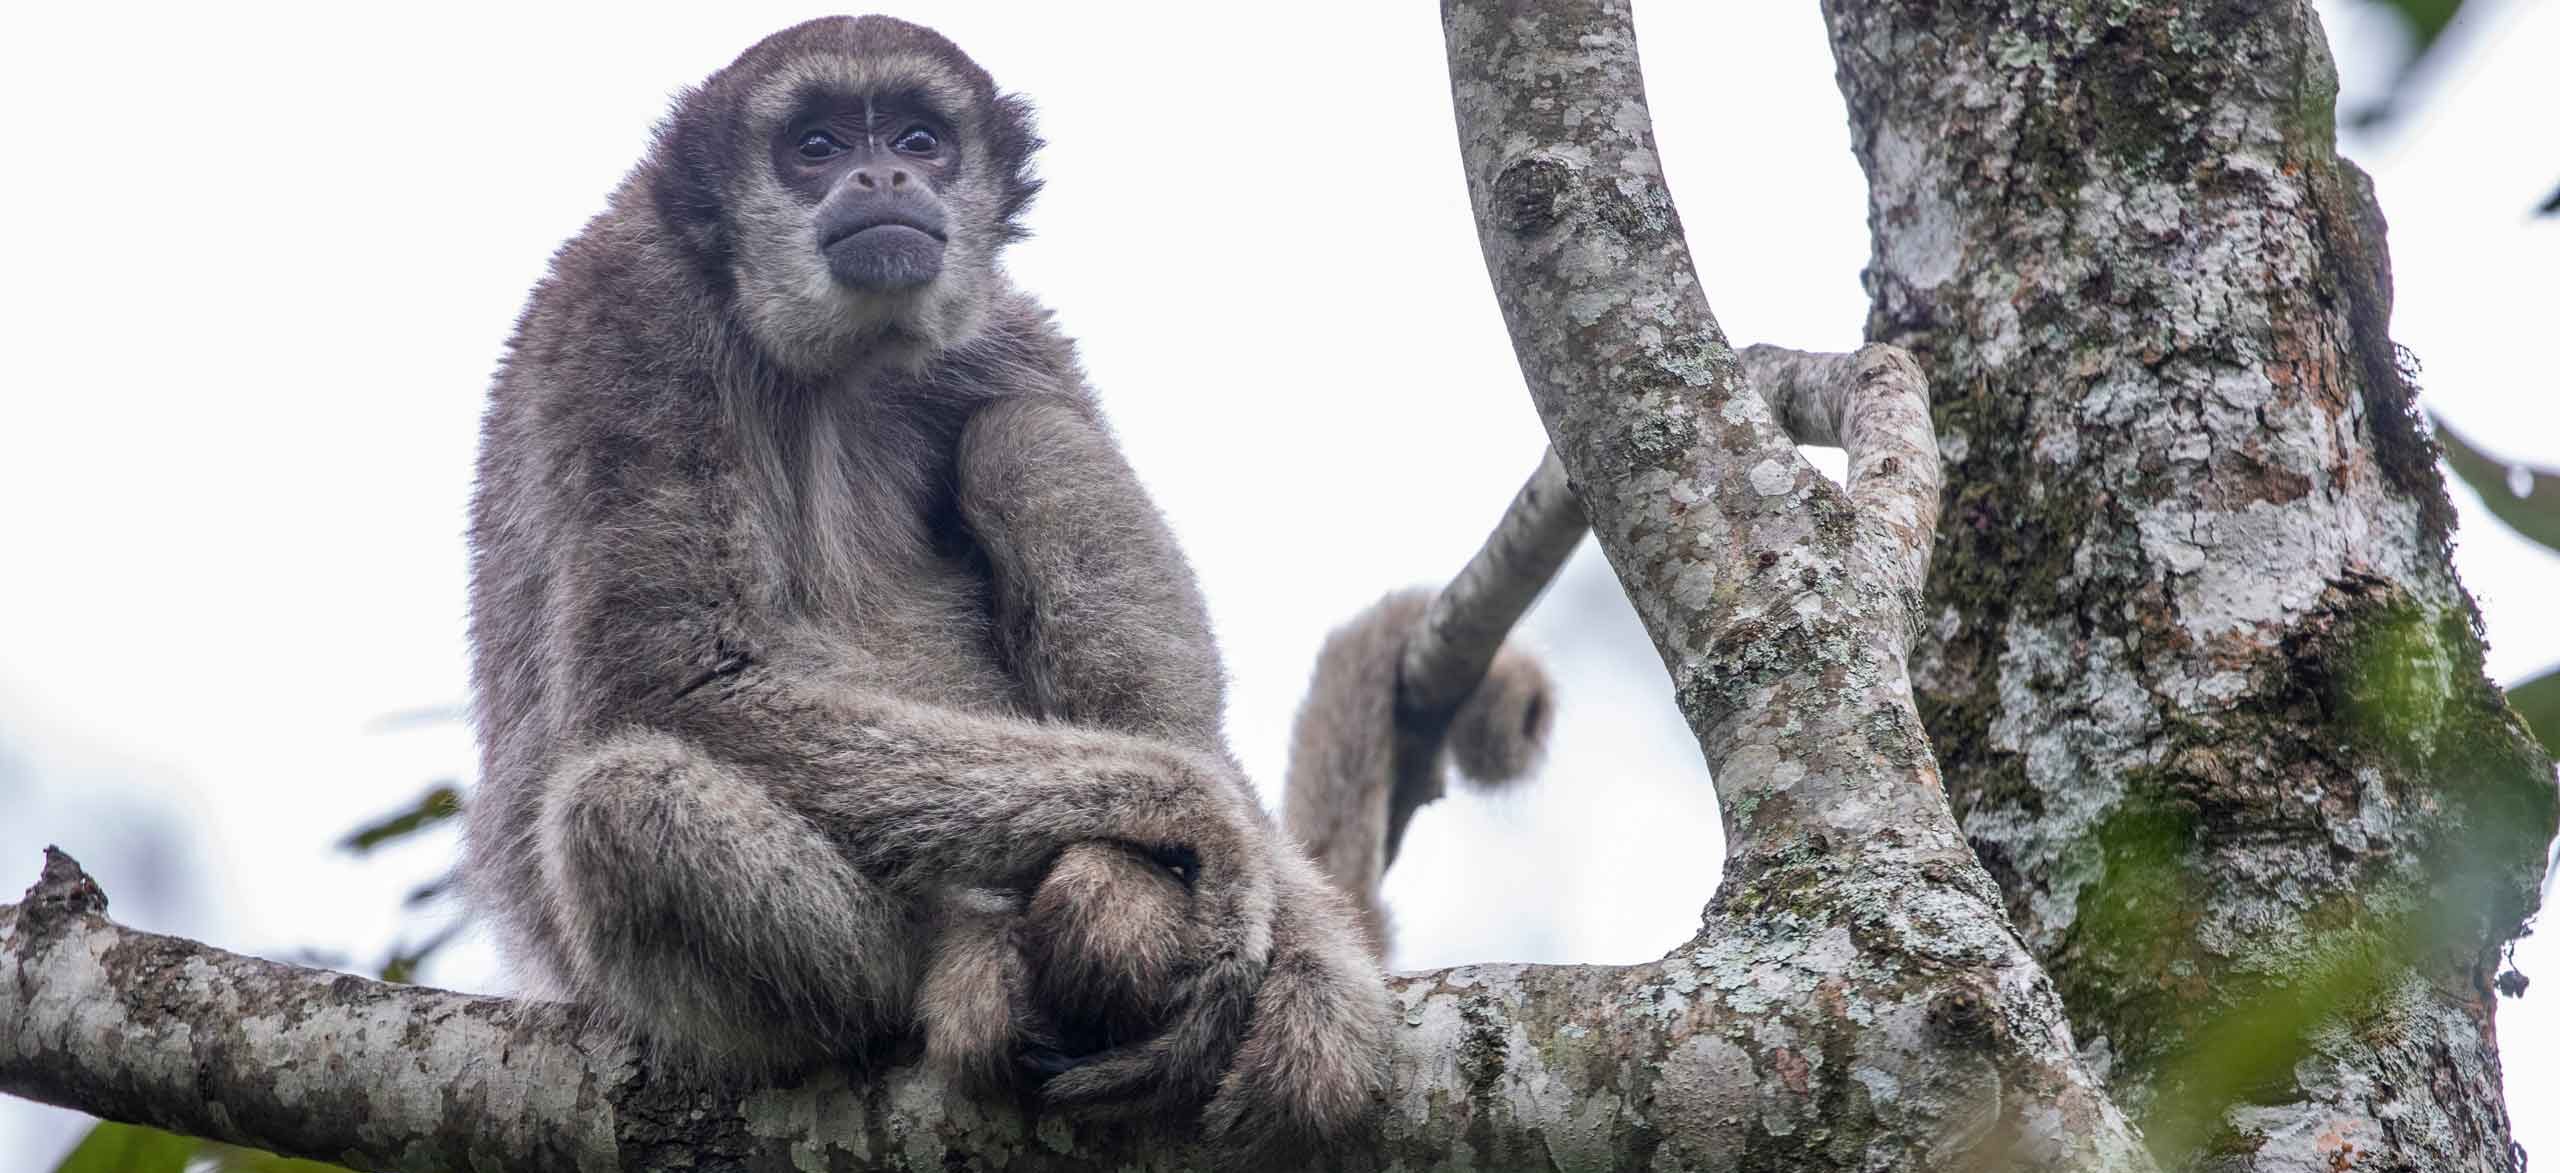 Northern muriqui sitting on branch in Brazil national park